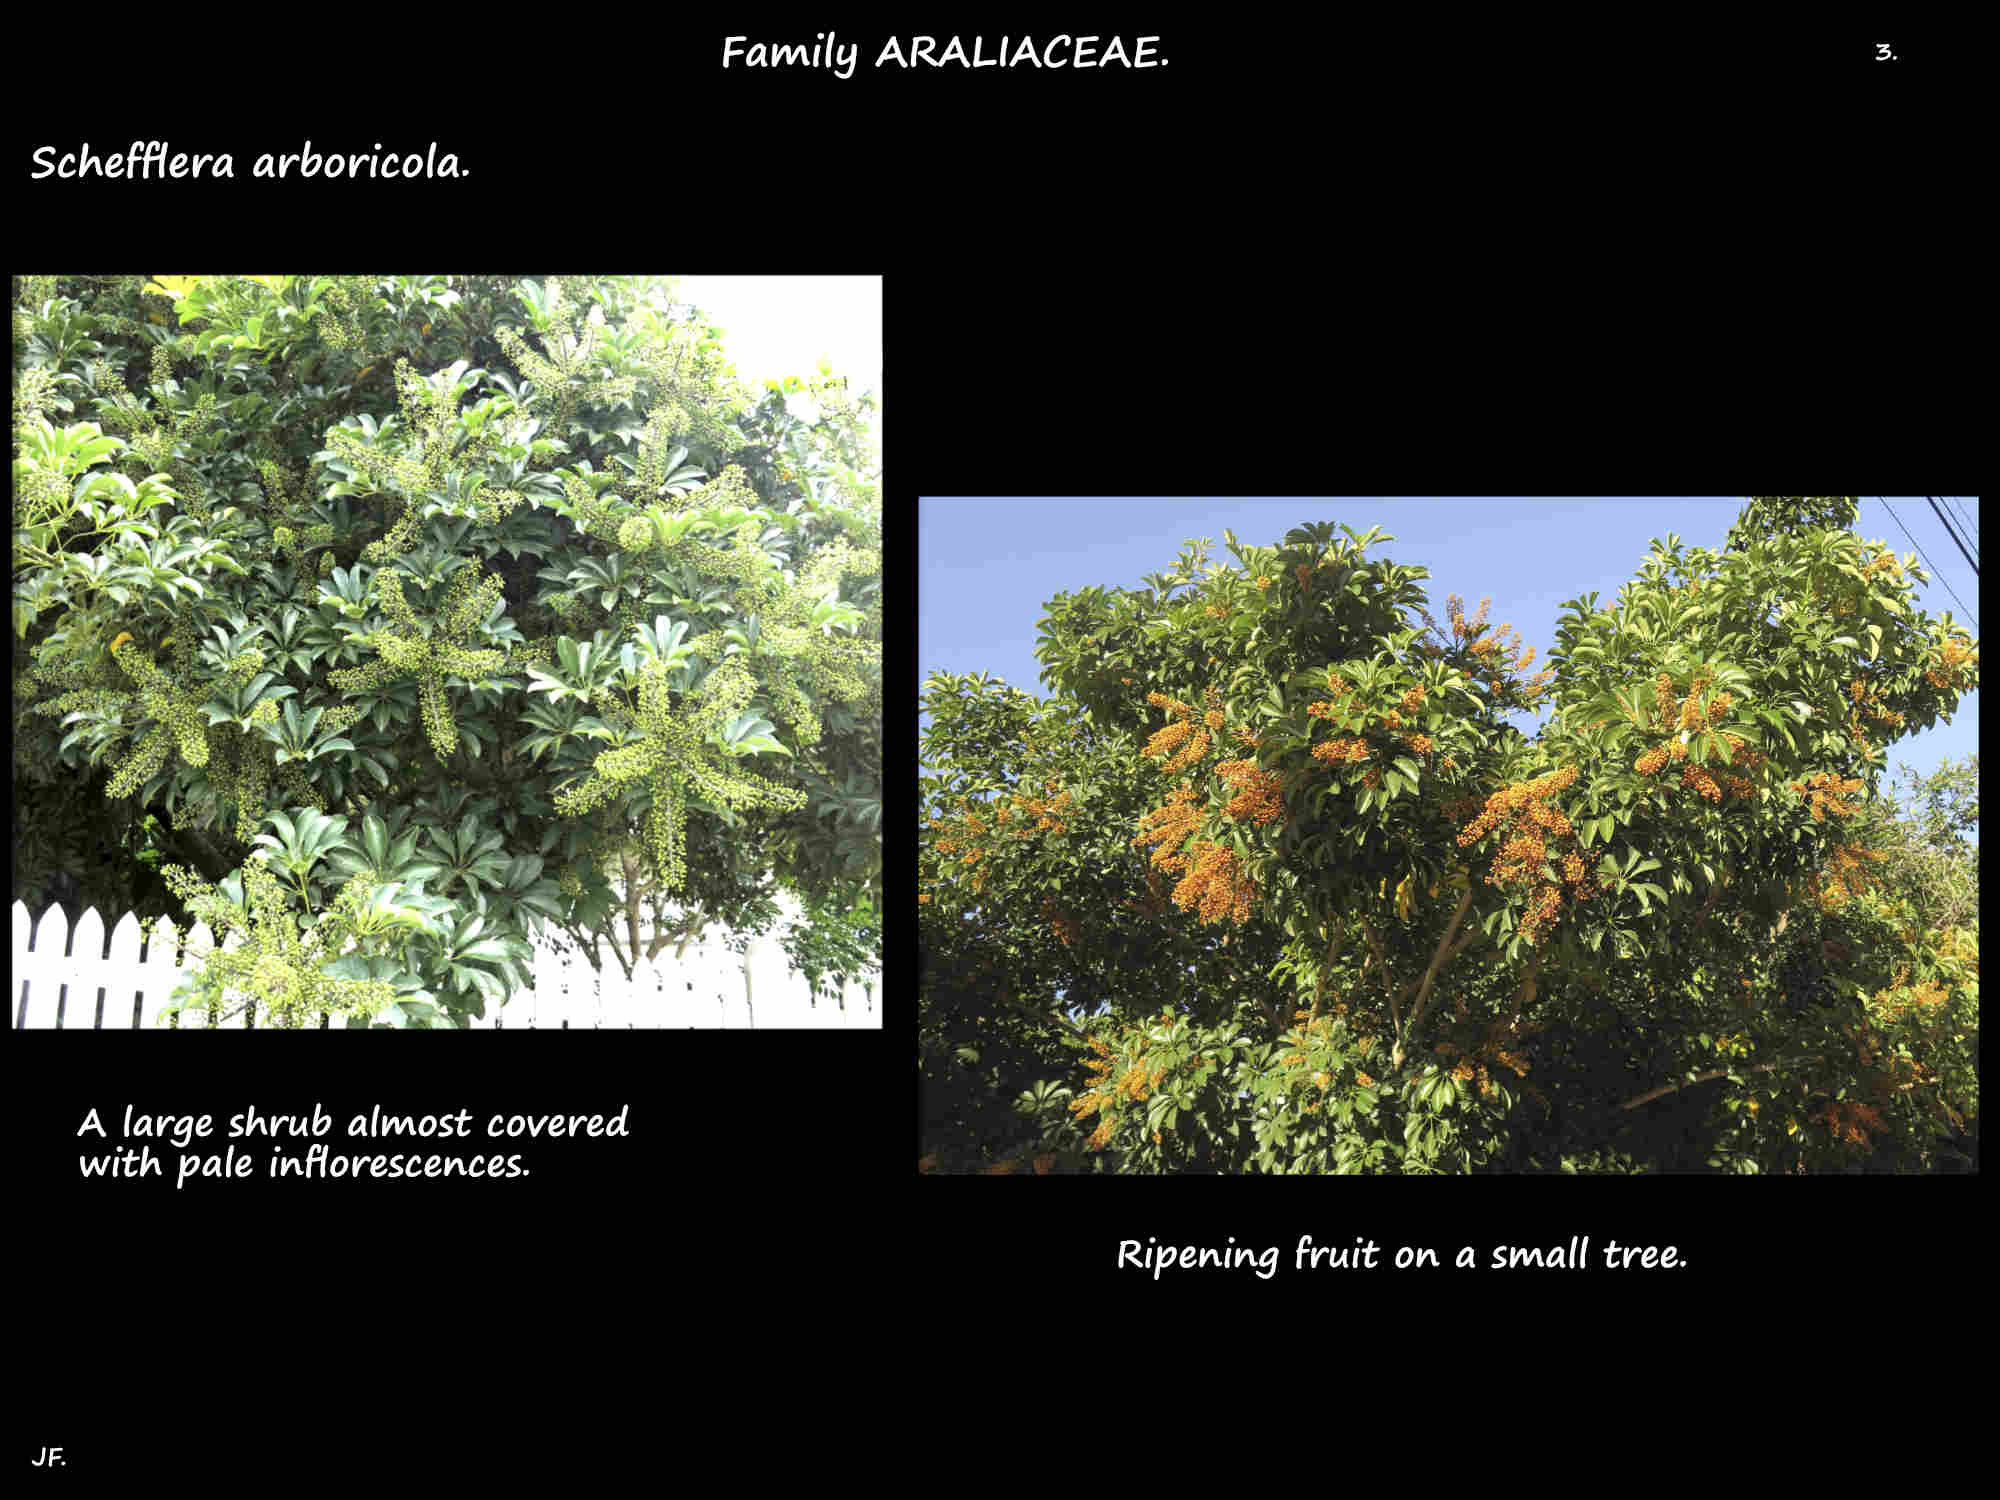 3 Dwarf umbrella trees covered in inflorescences & fruit